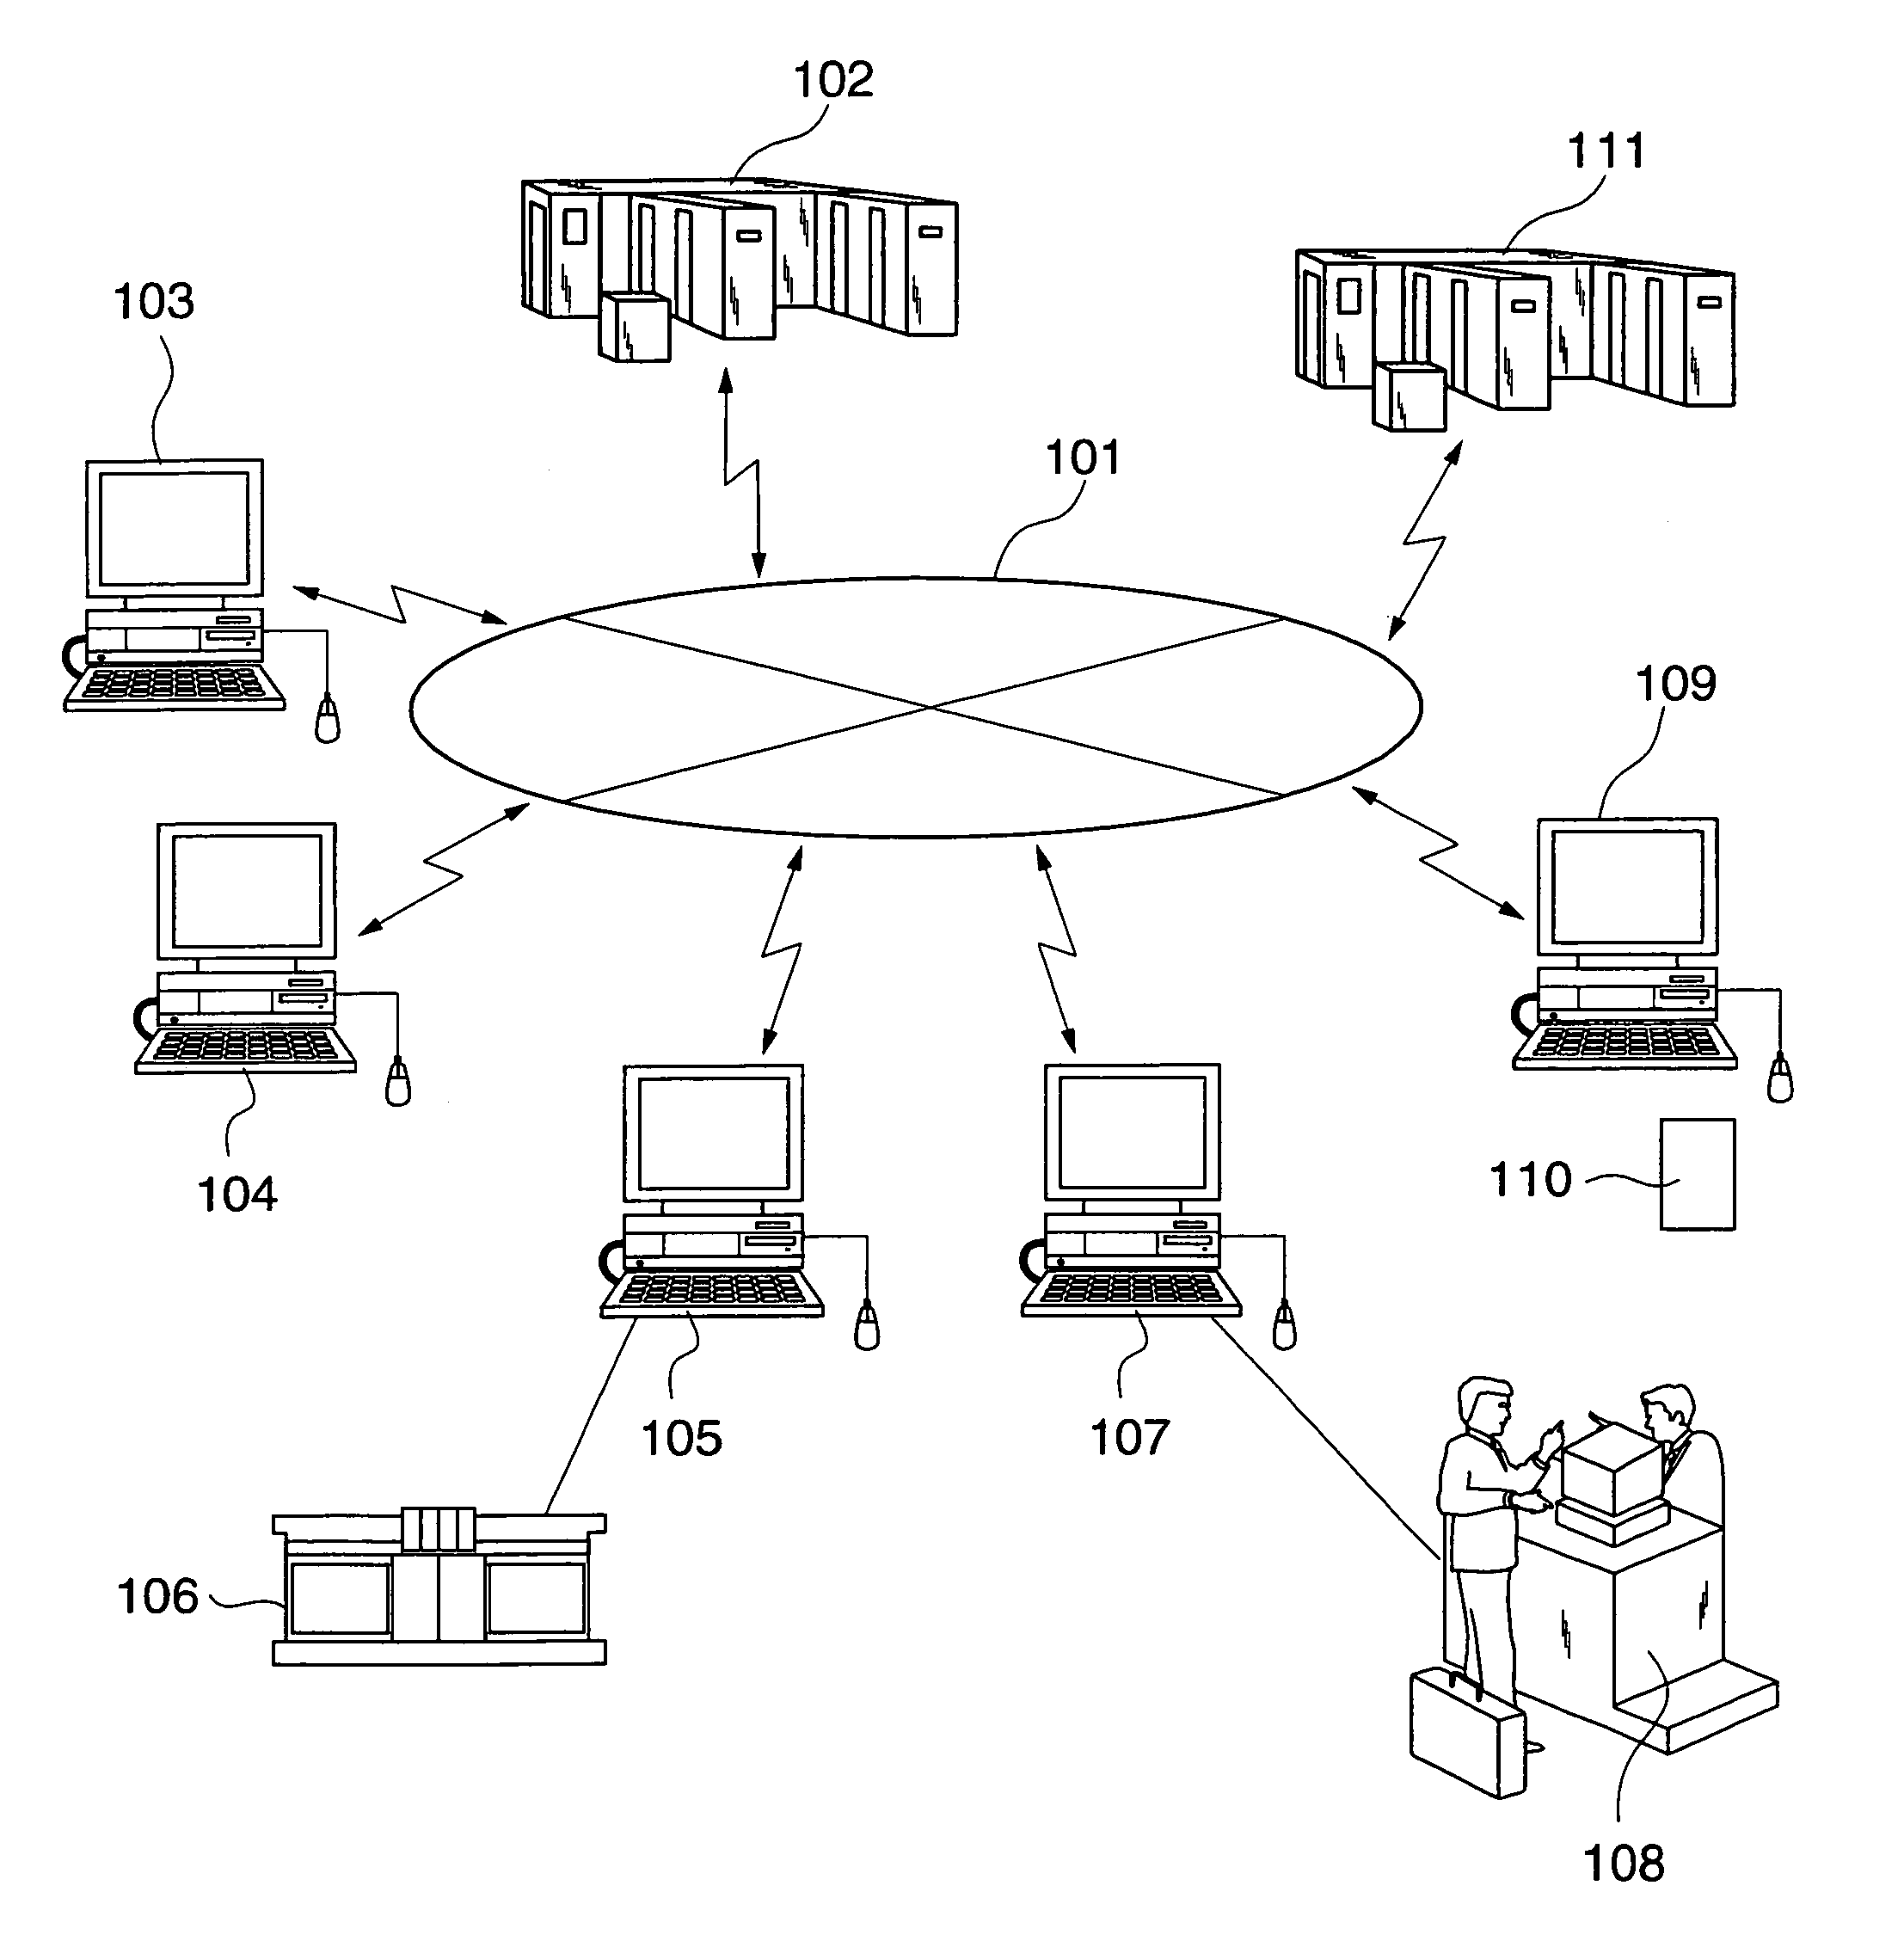 Booking certificate issuing apparatus and method